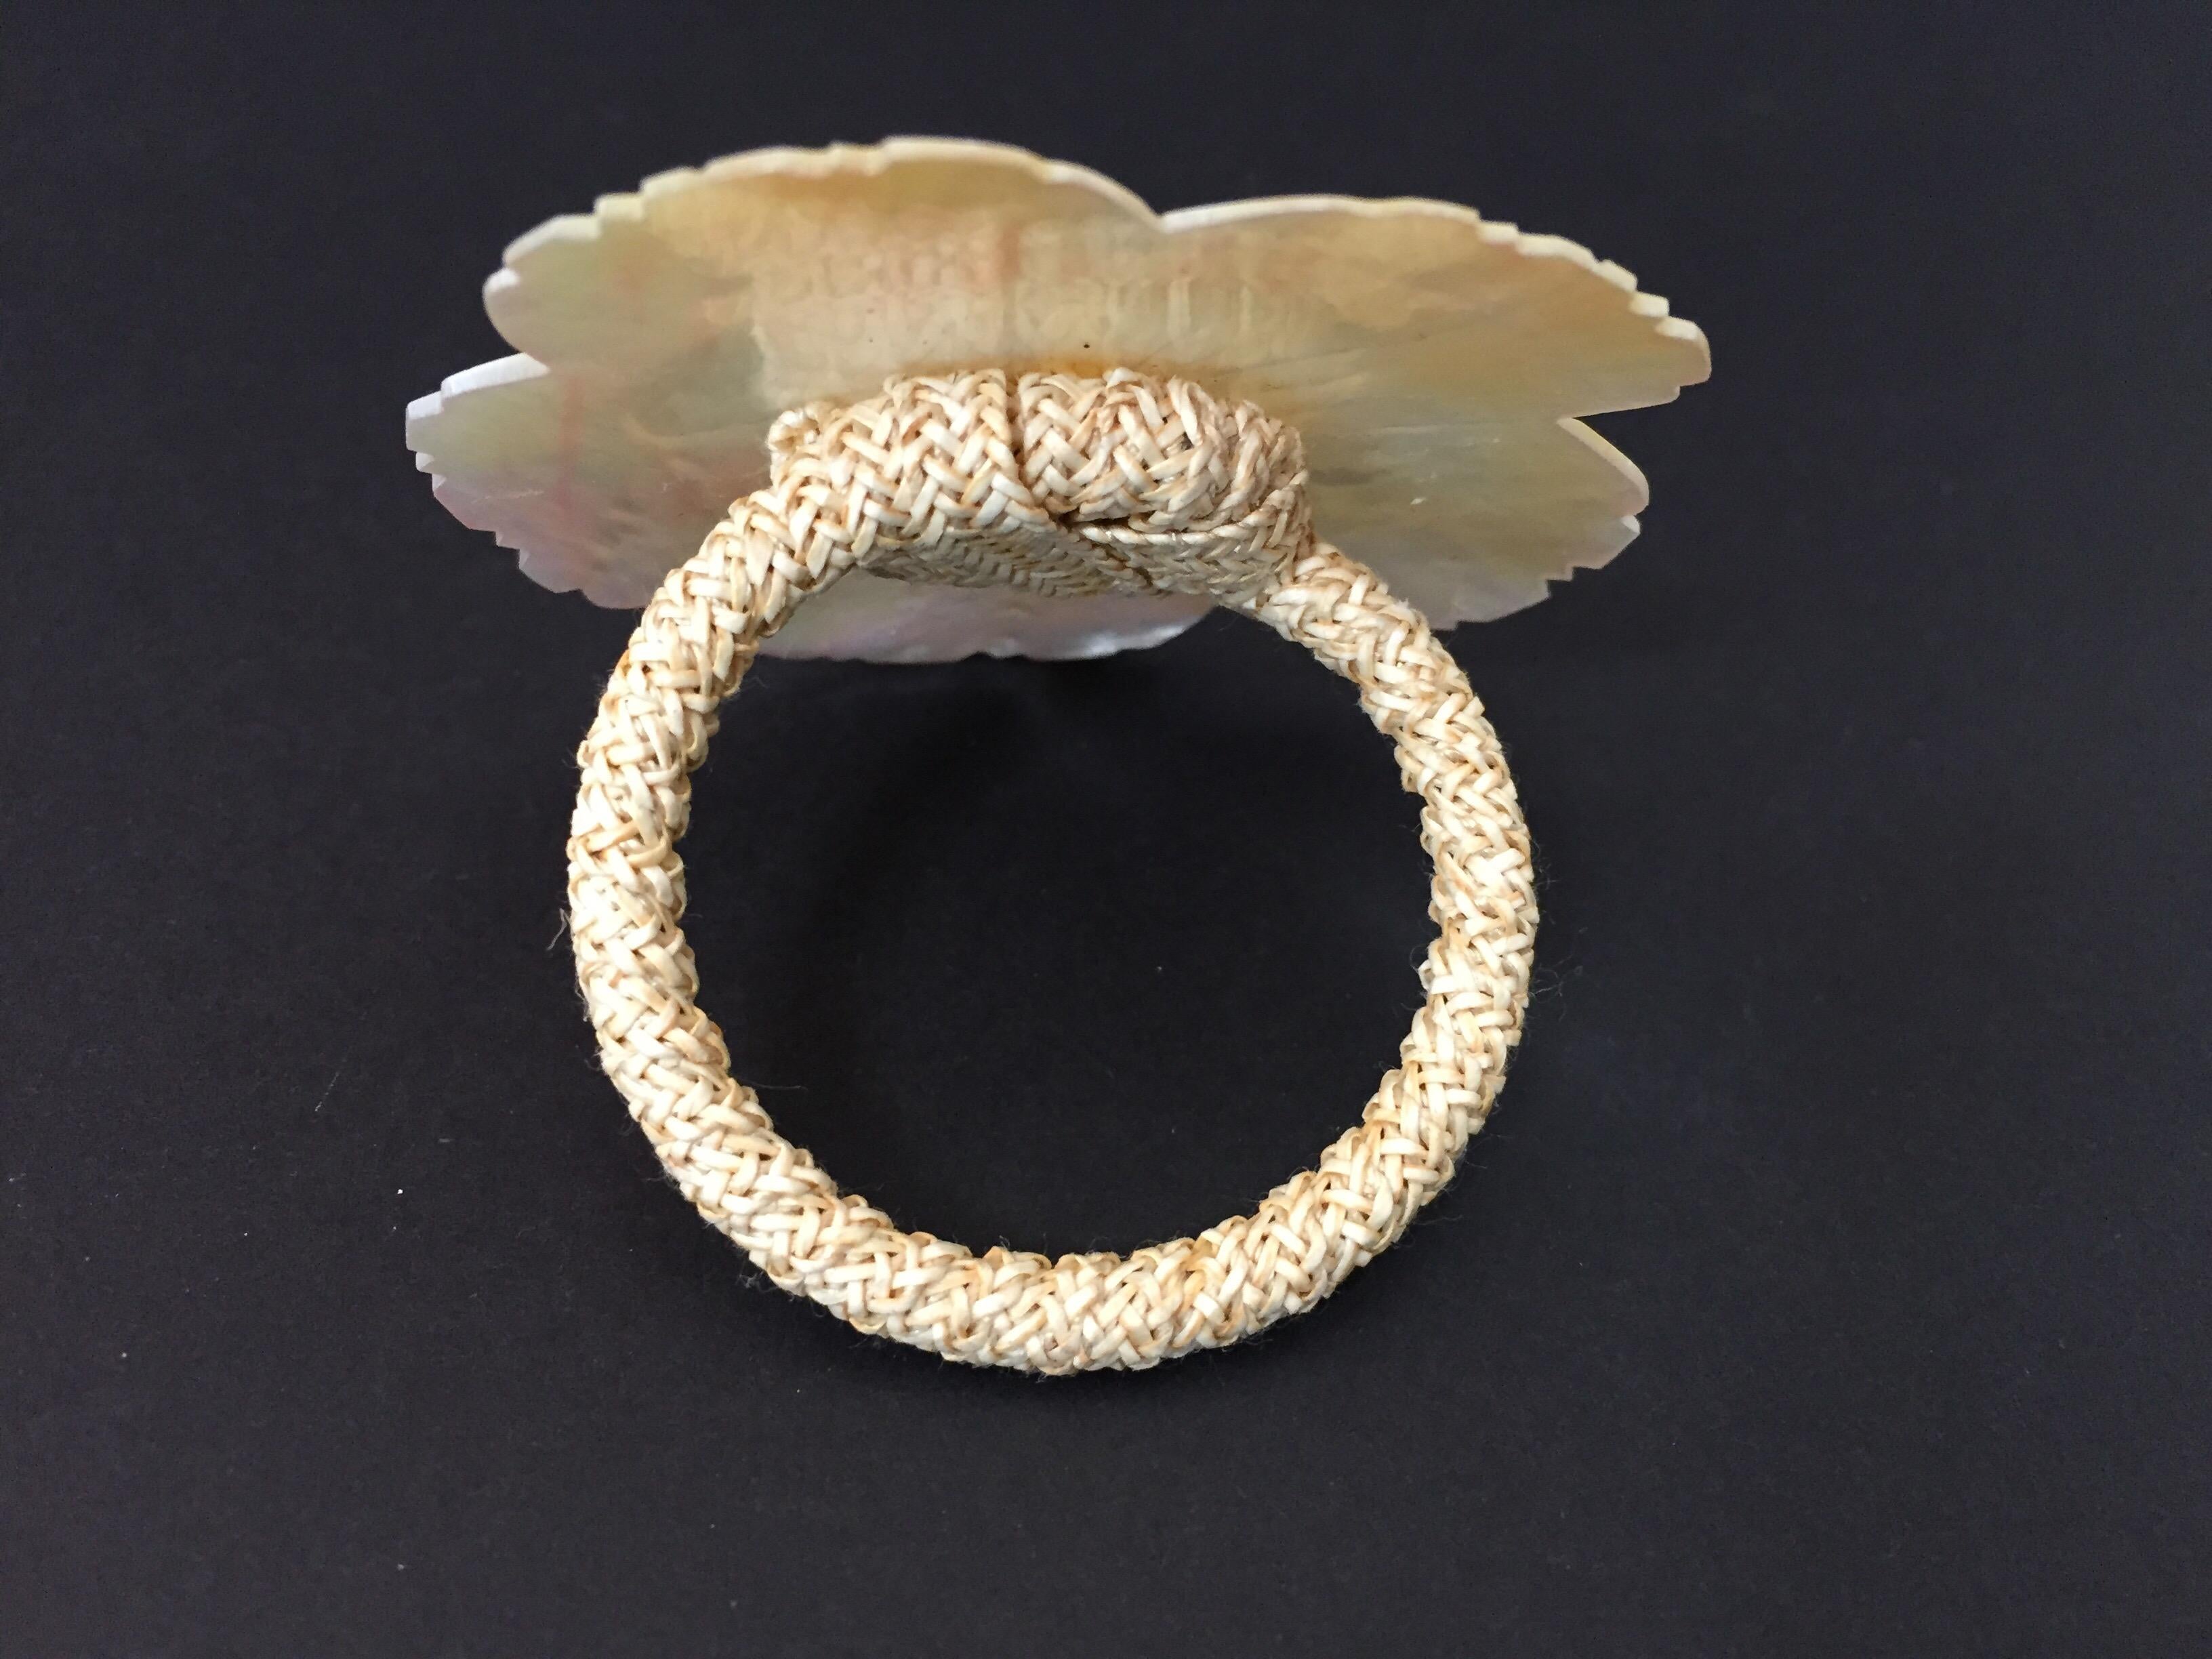 Handcrafted Six Napkin Rings in Natural Capiz Pearl Shell In Good Condition For Sale In North Hollywood, CA